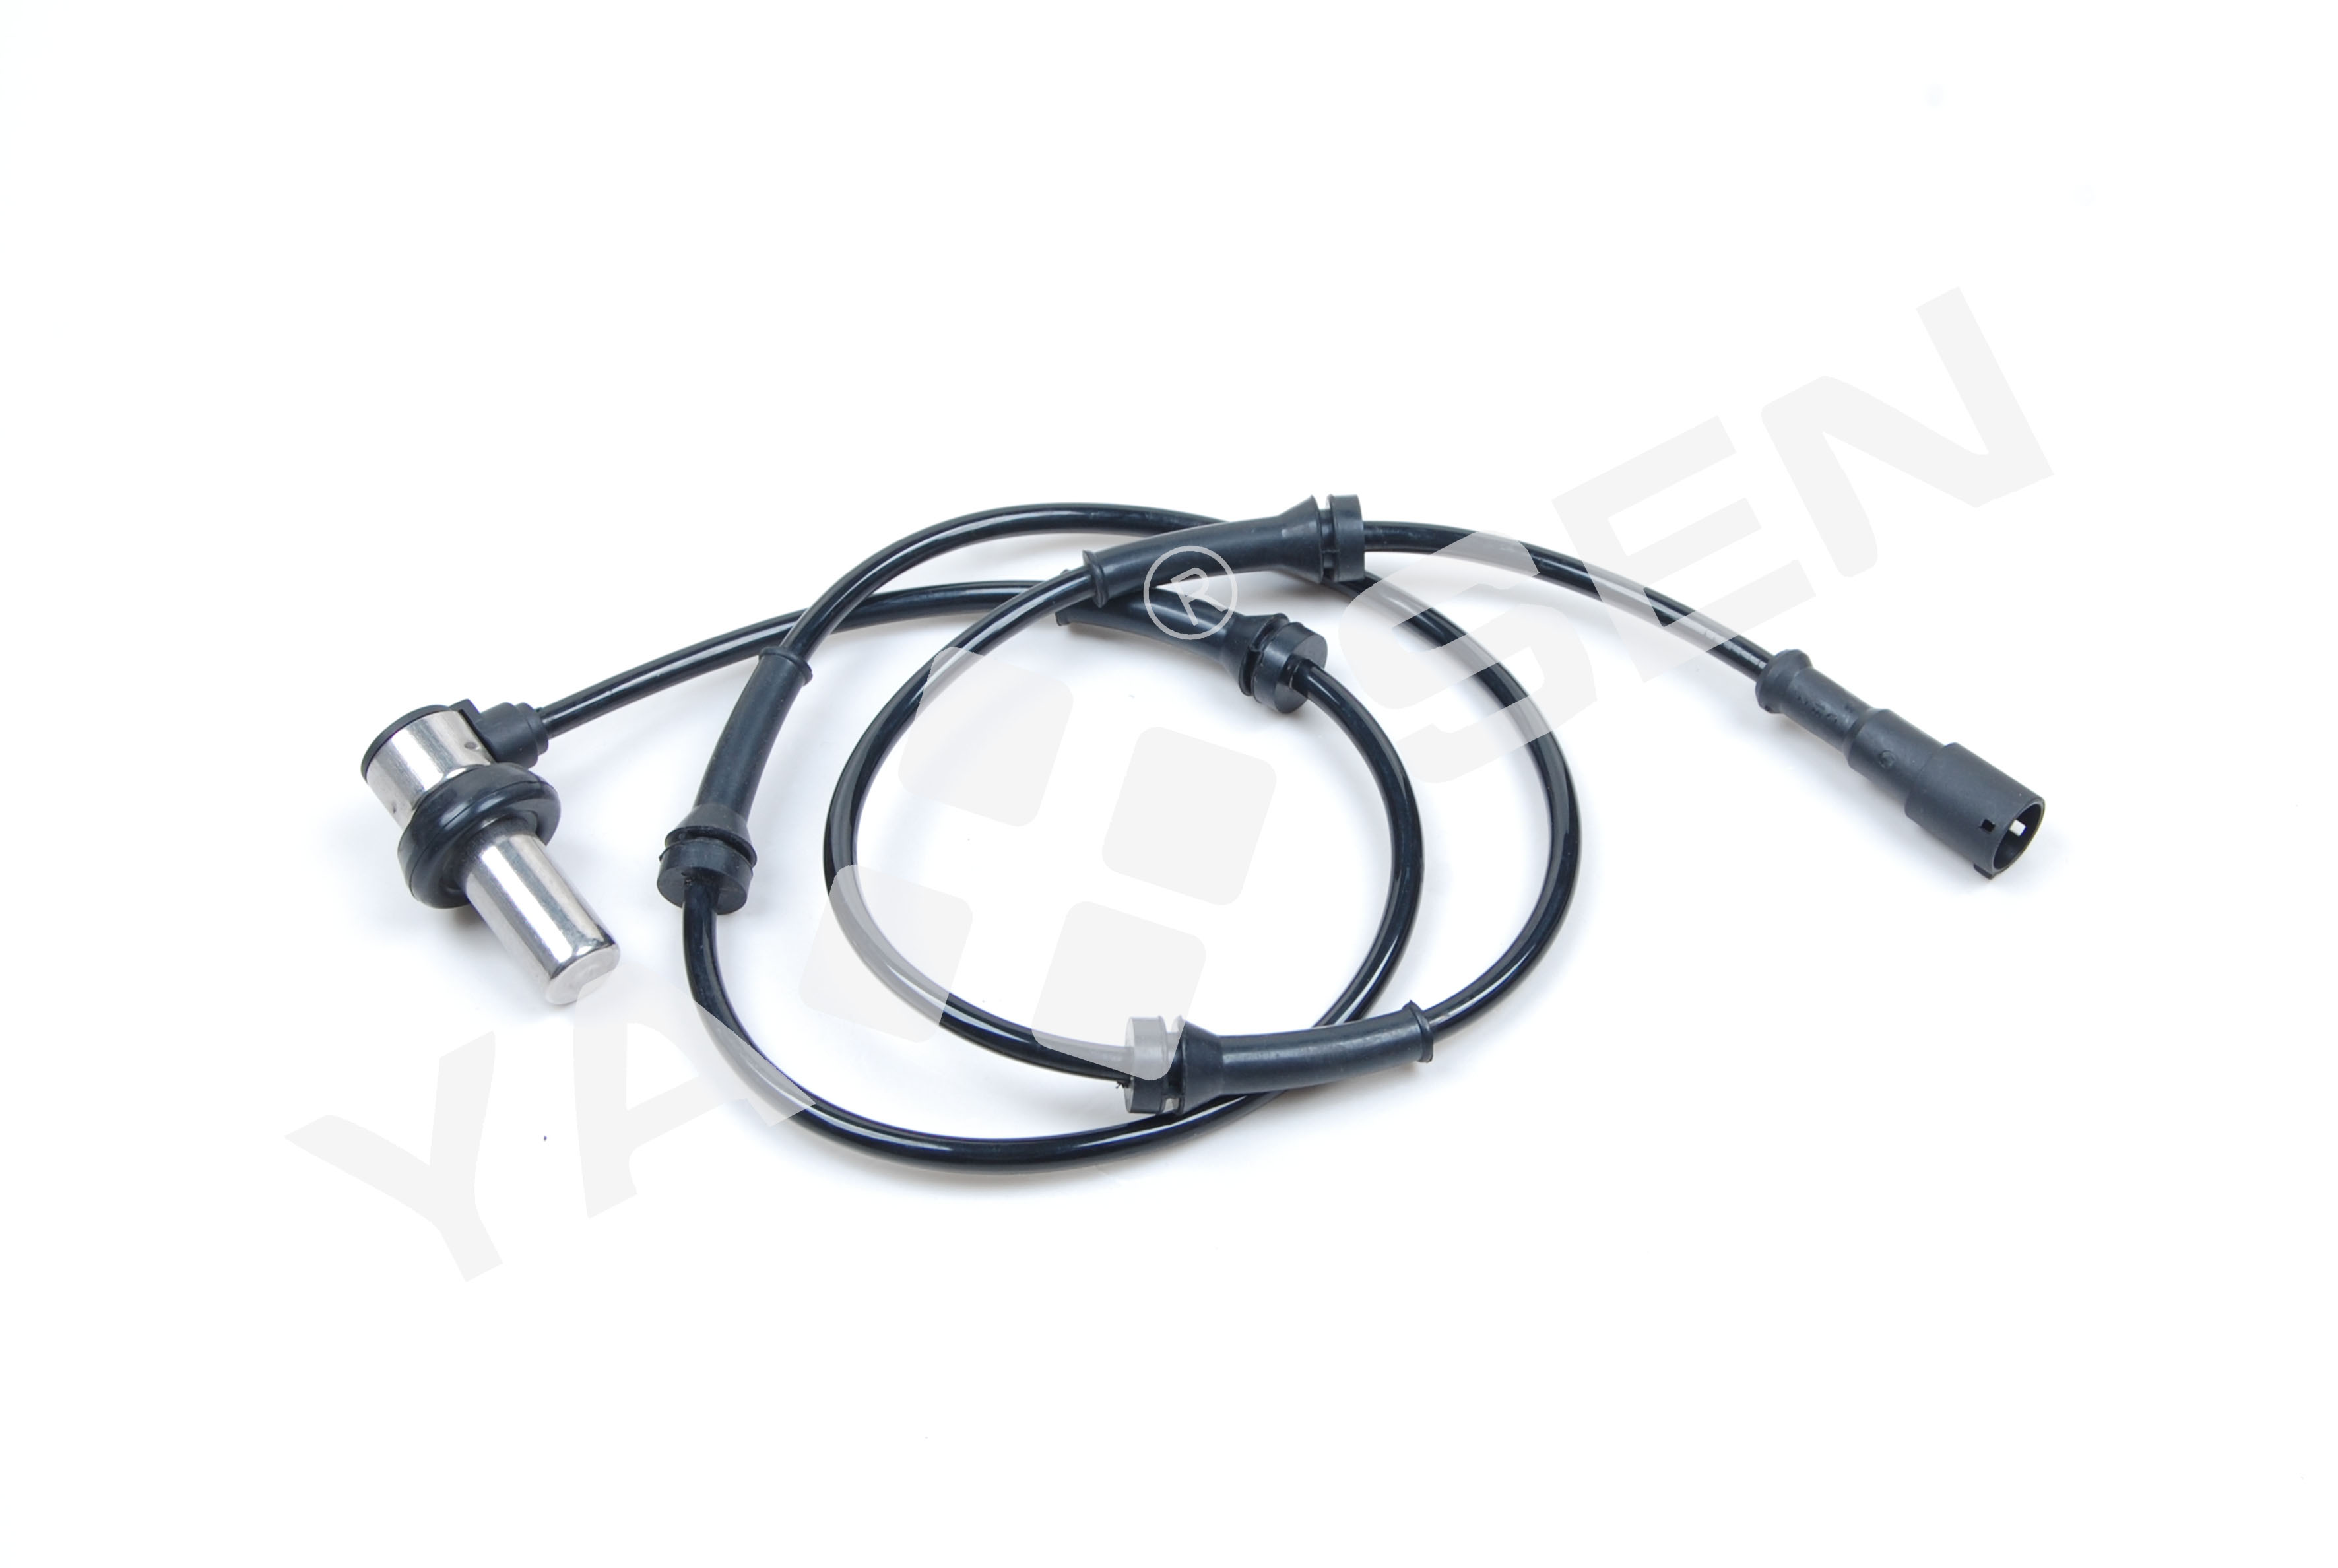 ABS Wheel Speed Sensor for LAND ROVER, STC2786 STC2780 STC2870 4410329282 44710327590